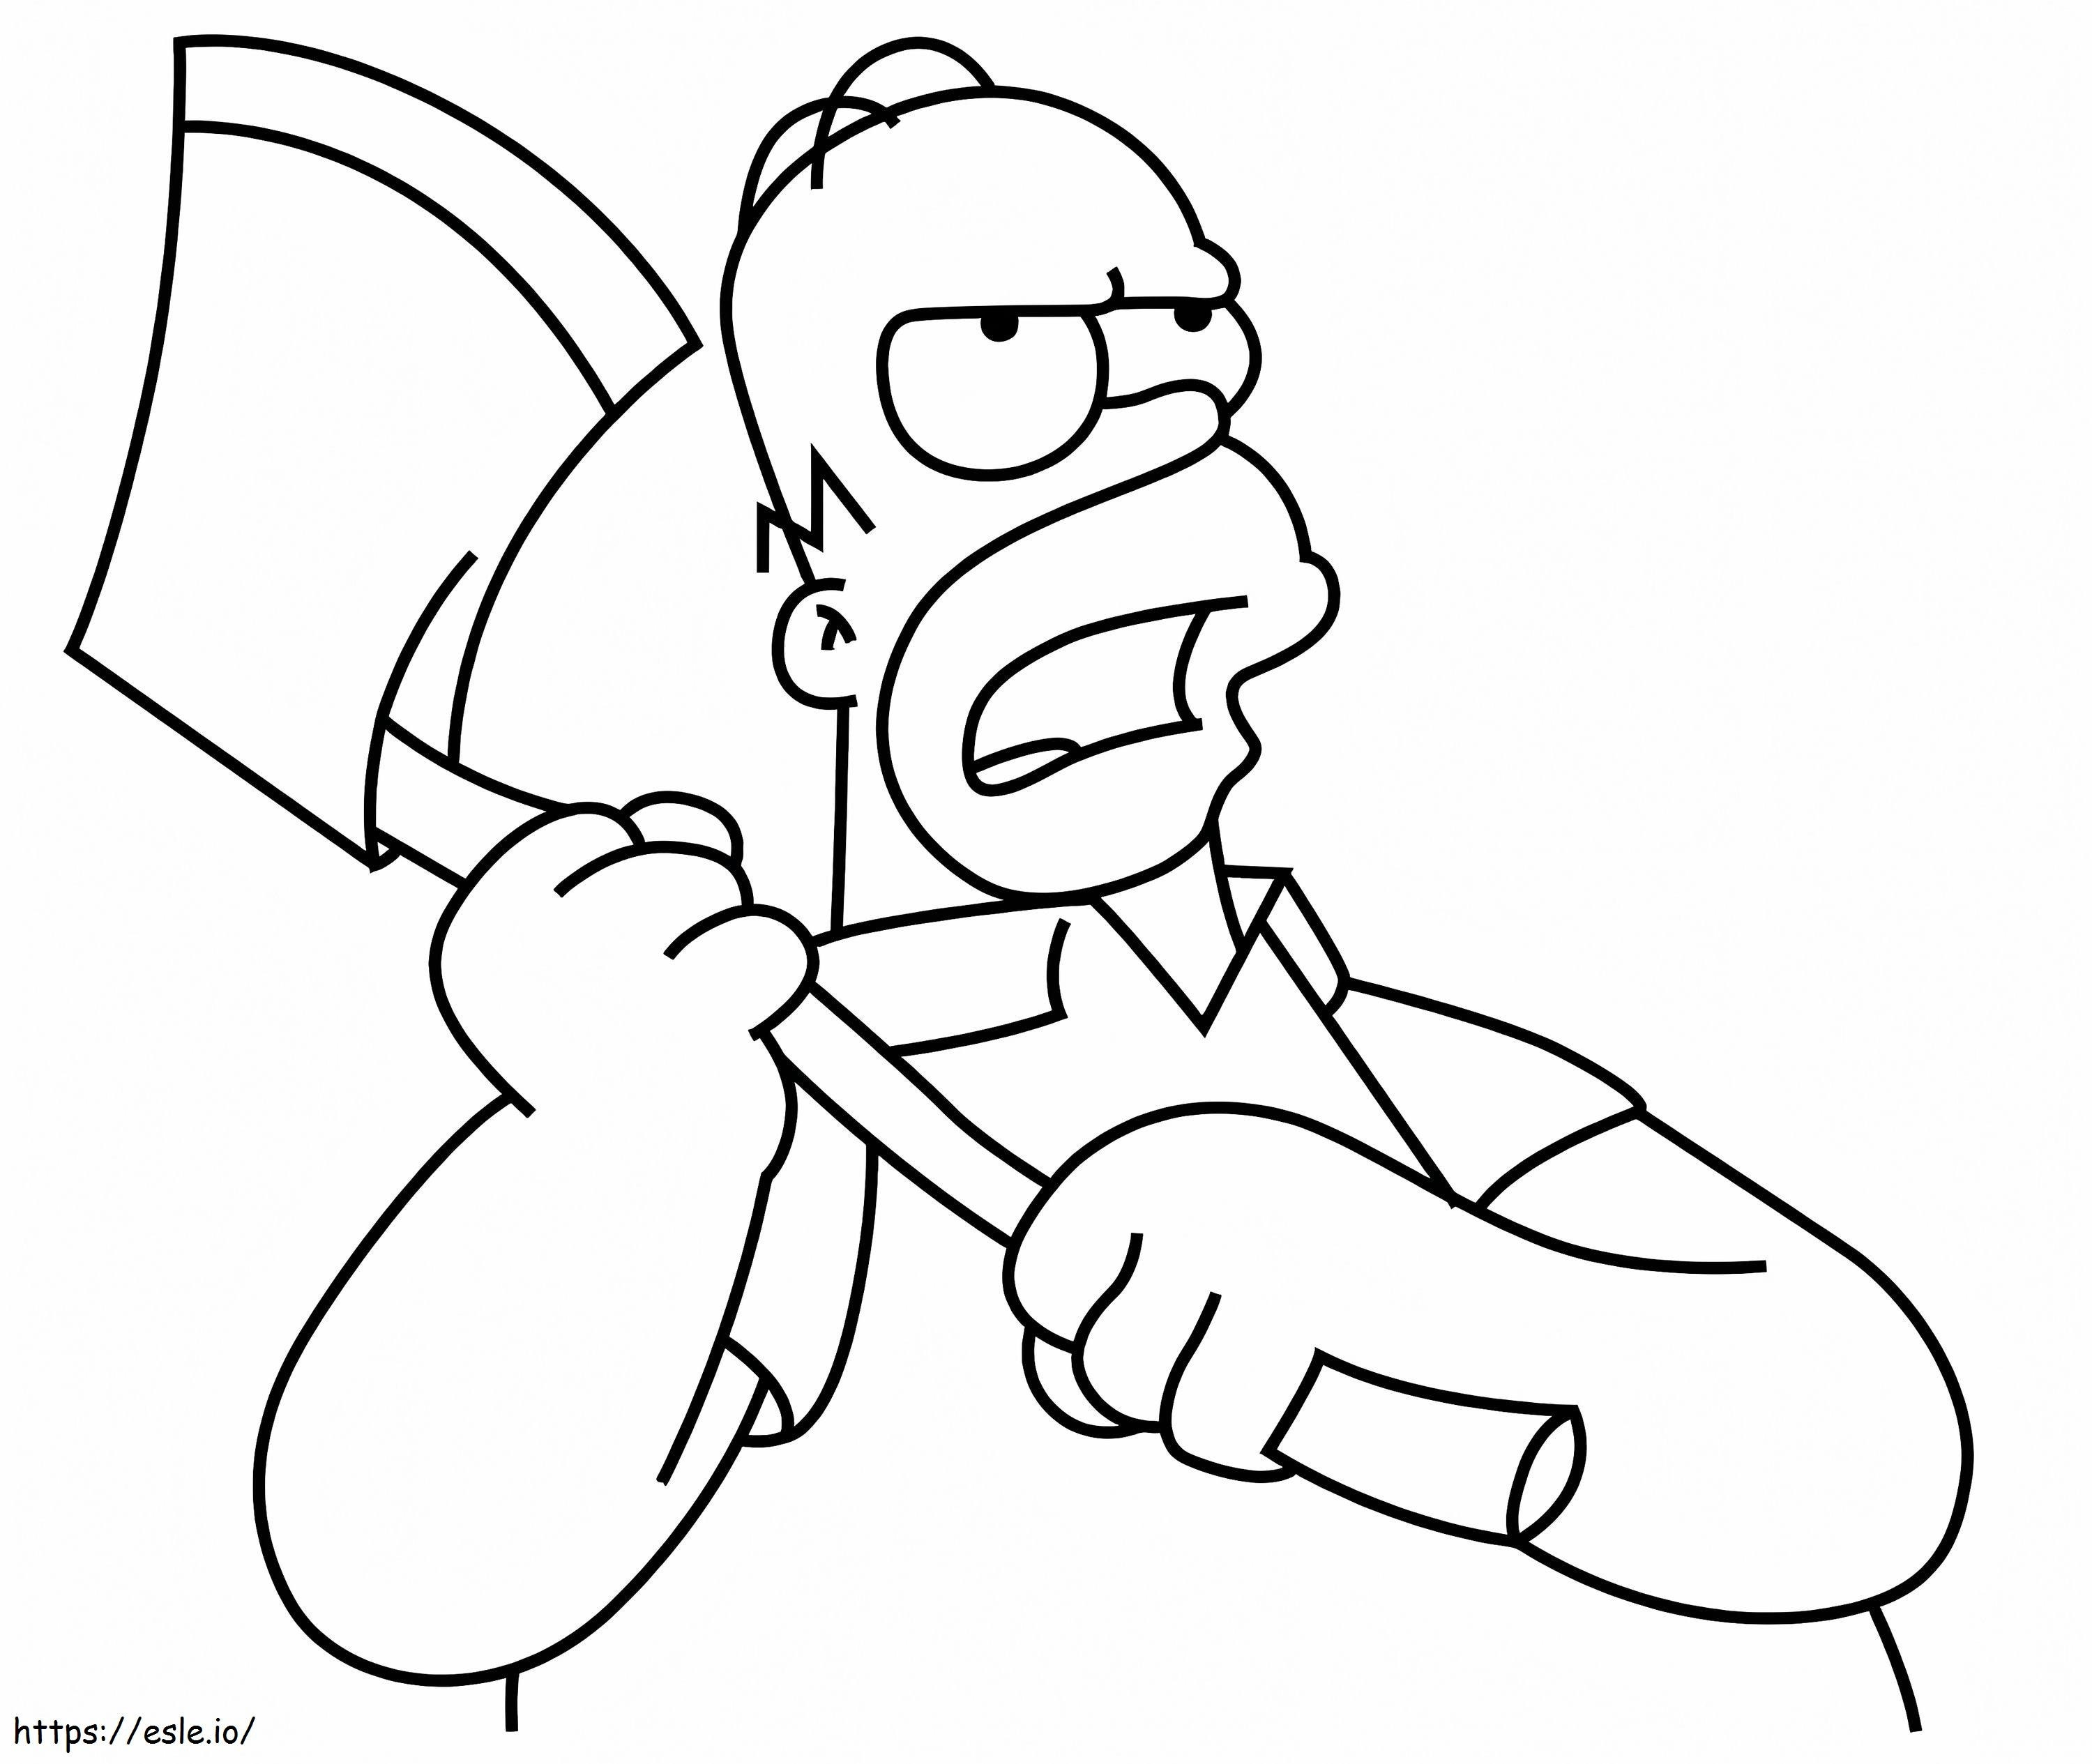 Homer Simpson With Axe coloring page